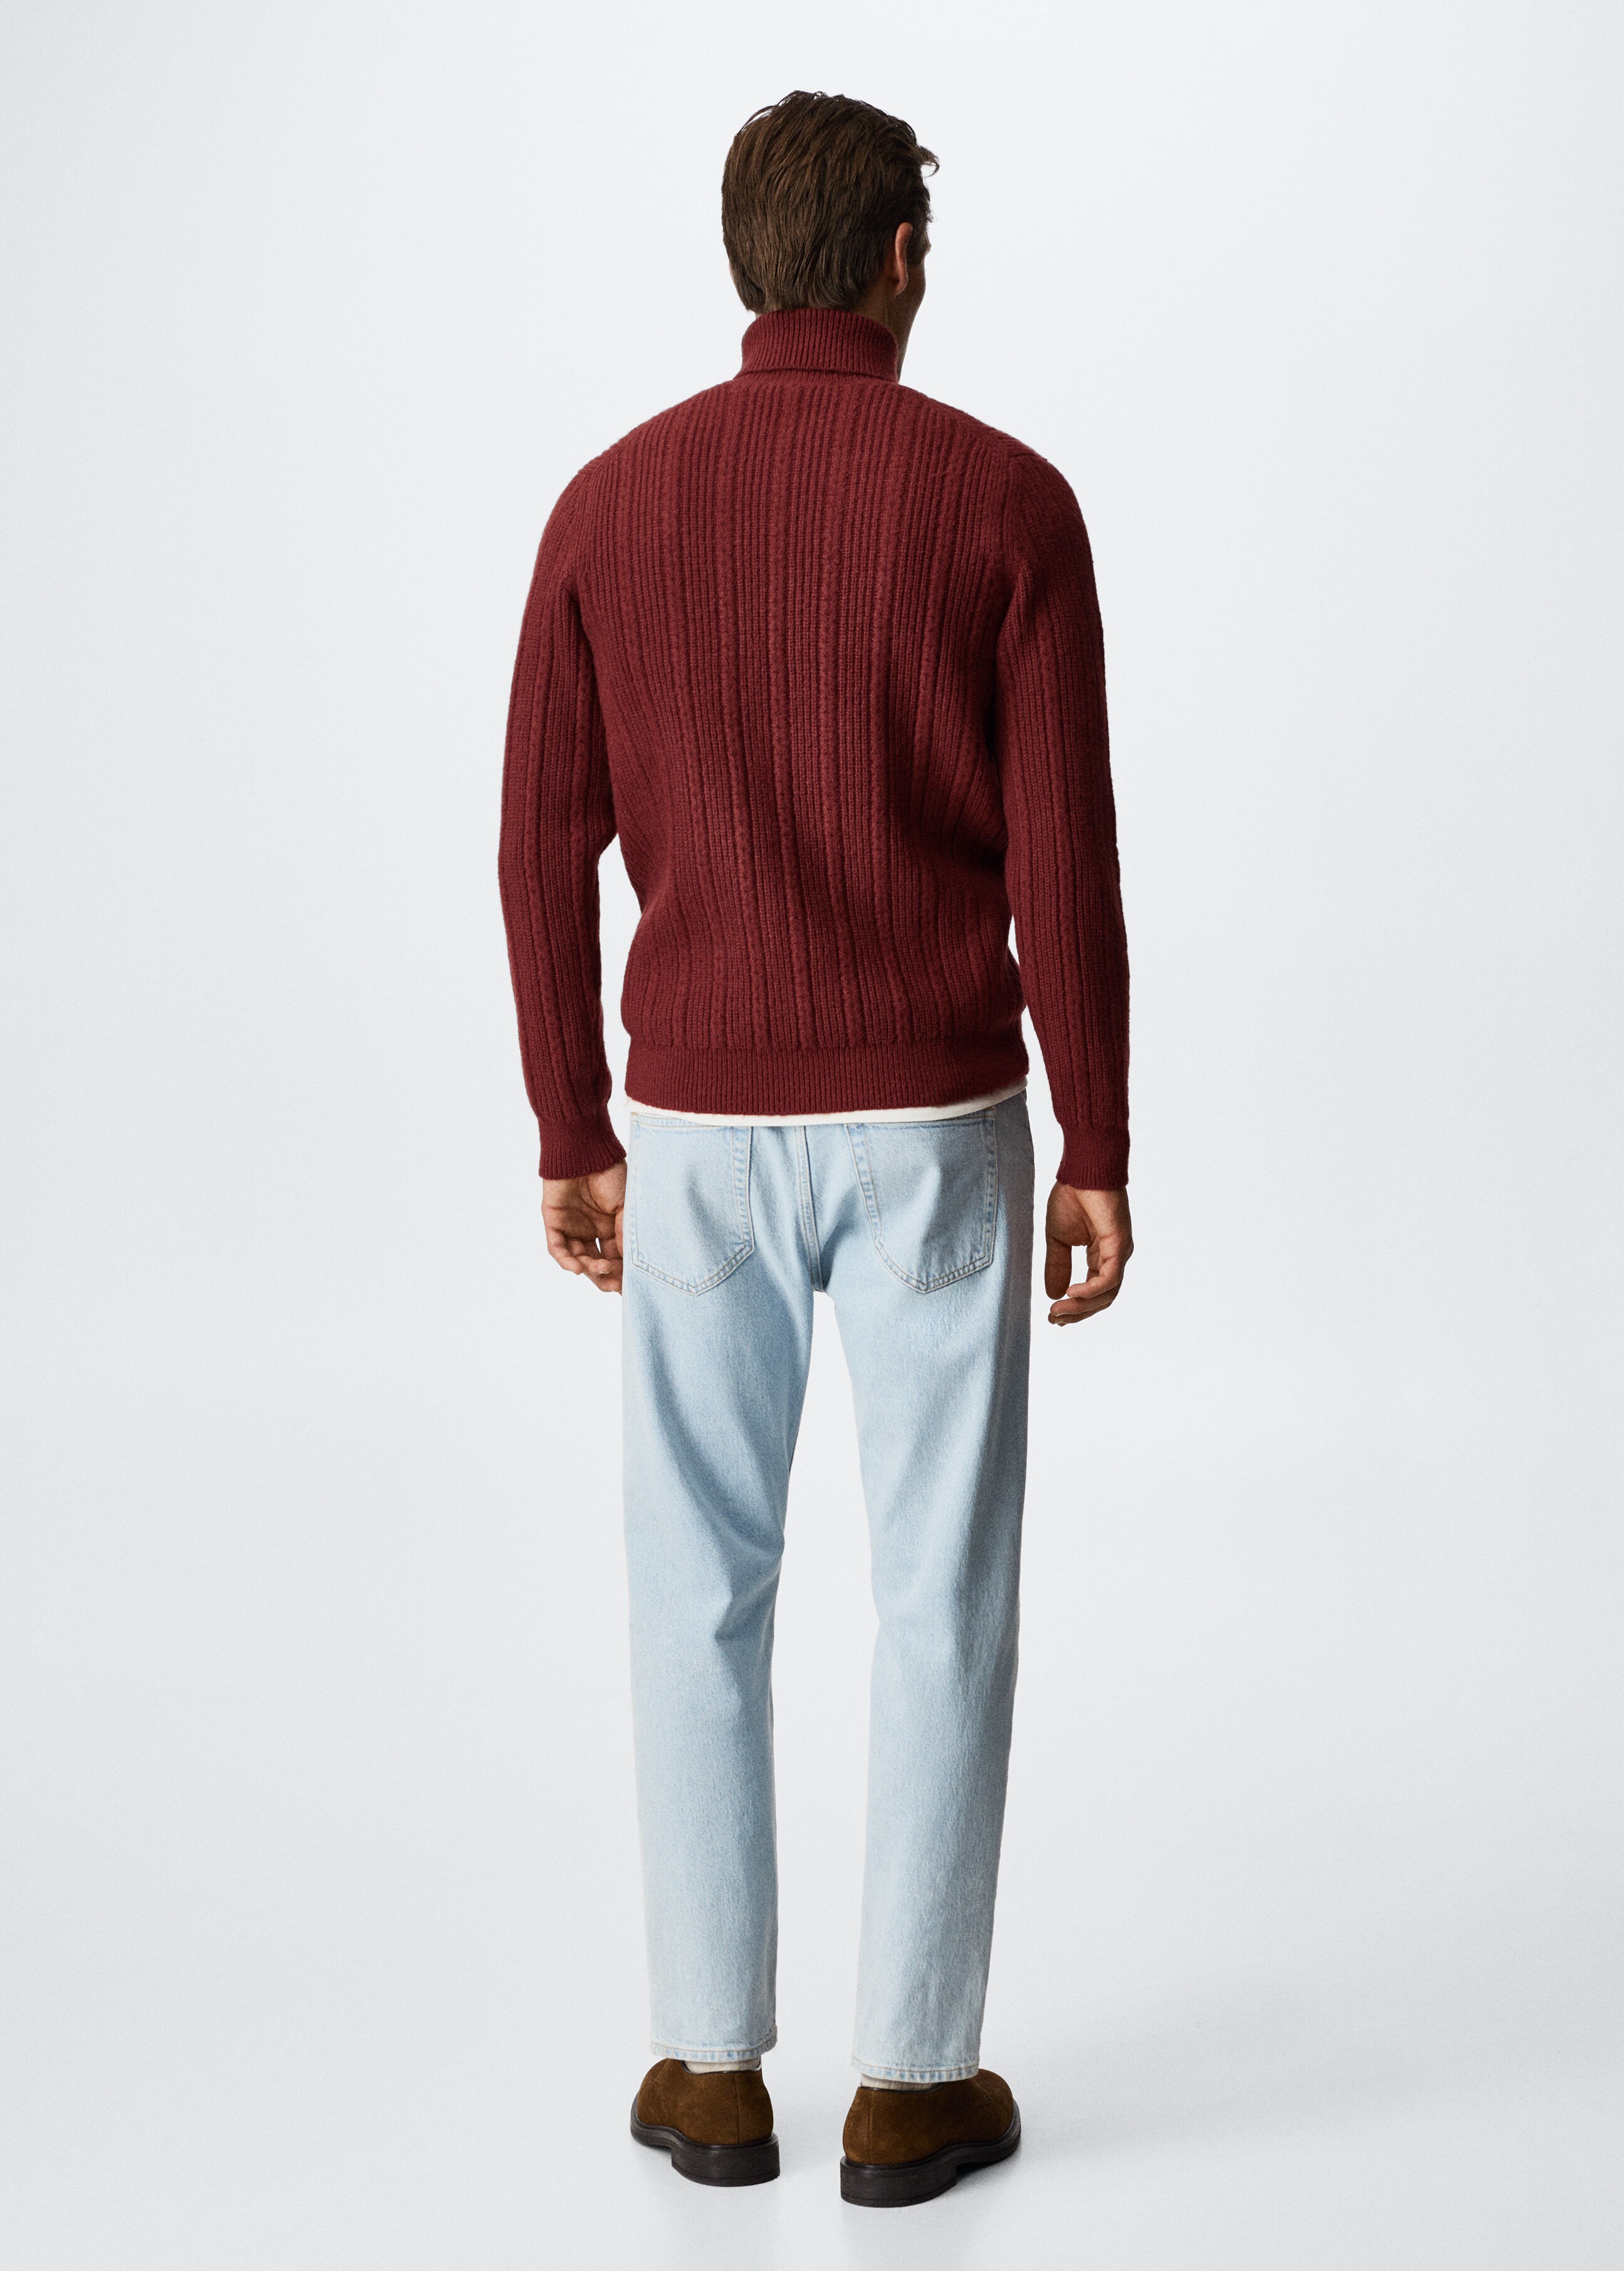 Structured turtleneck sweater - Reverse of the article